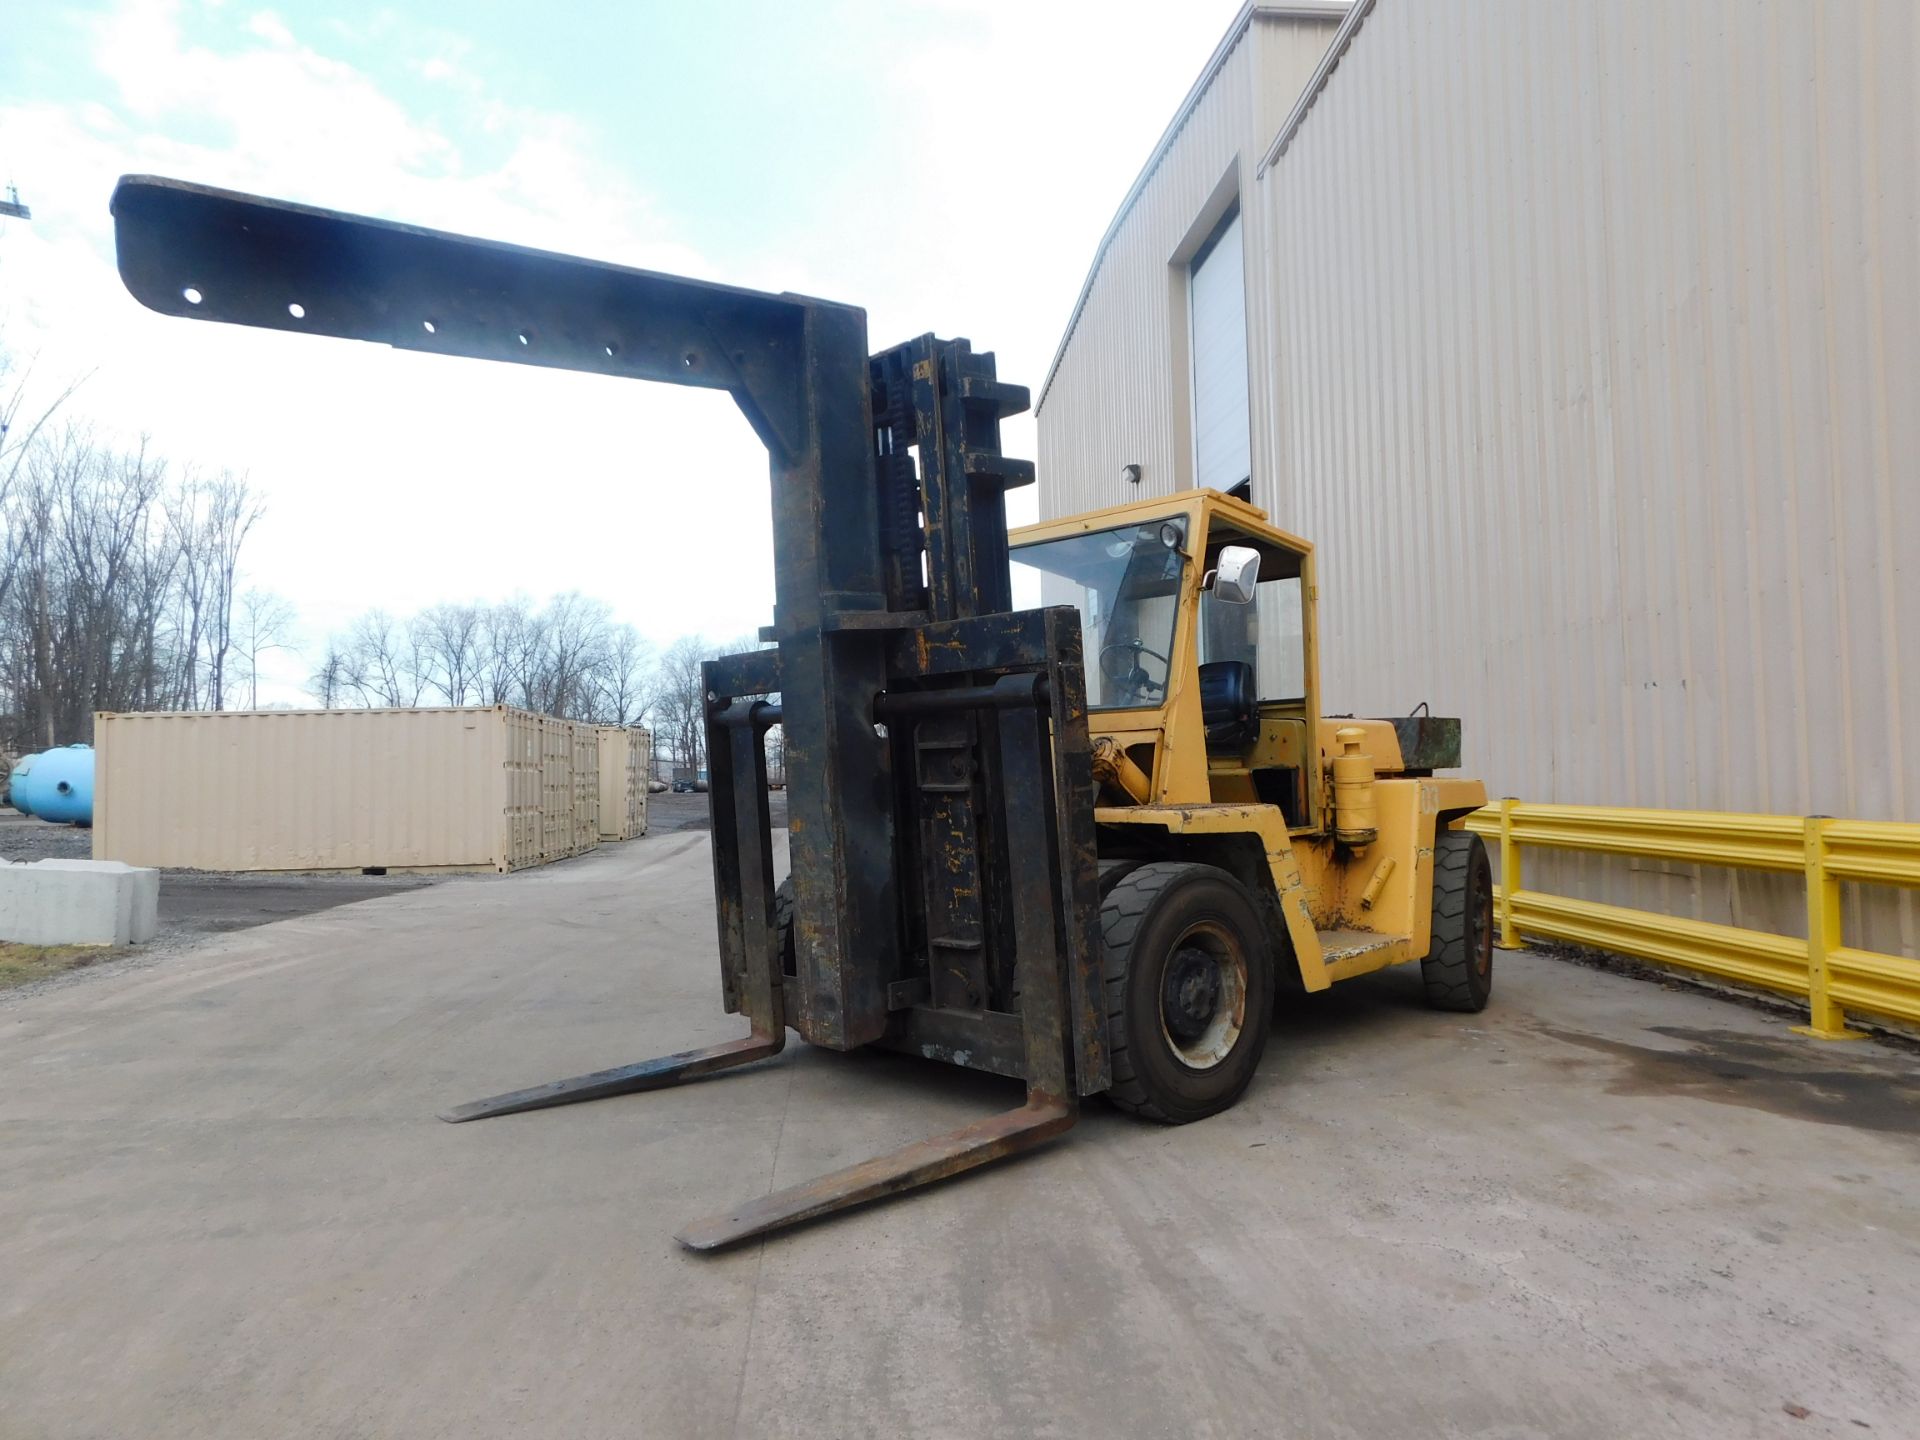 CLARK C500YS250 25,000 LB GAS FORKLIFT WITH 8' BOOM. 60" x 8" FORKS - Image 3 of 17